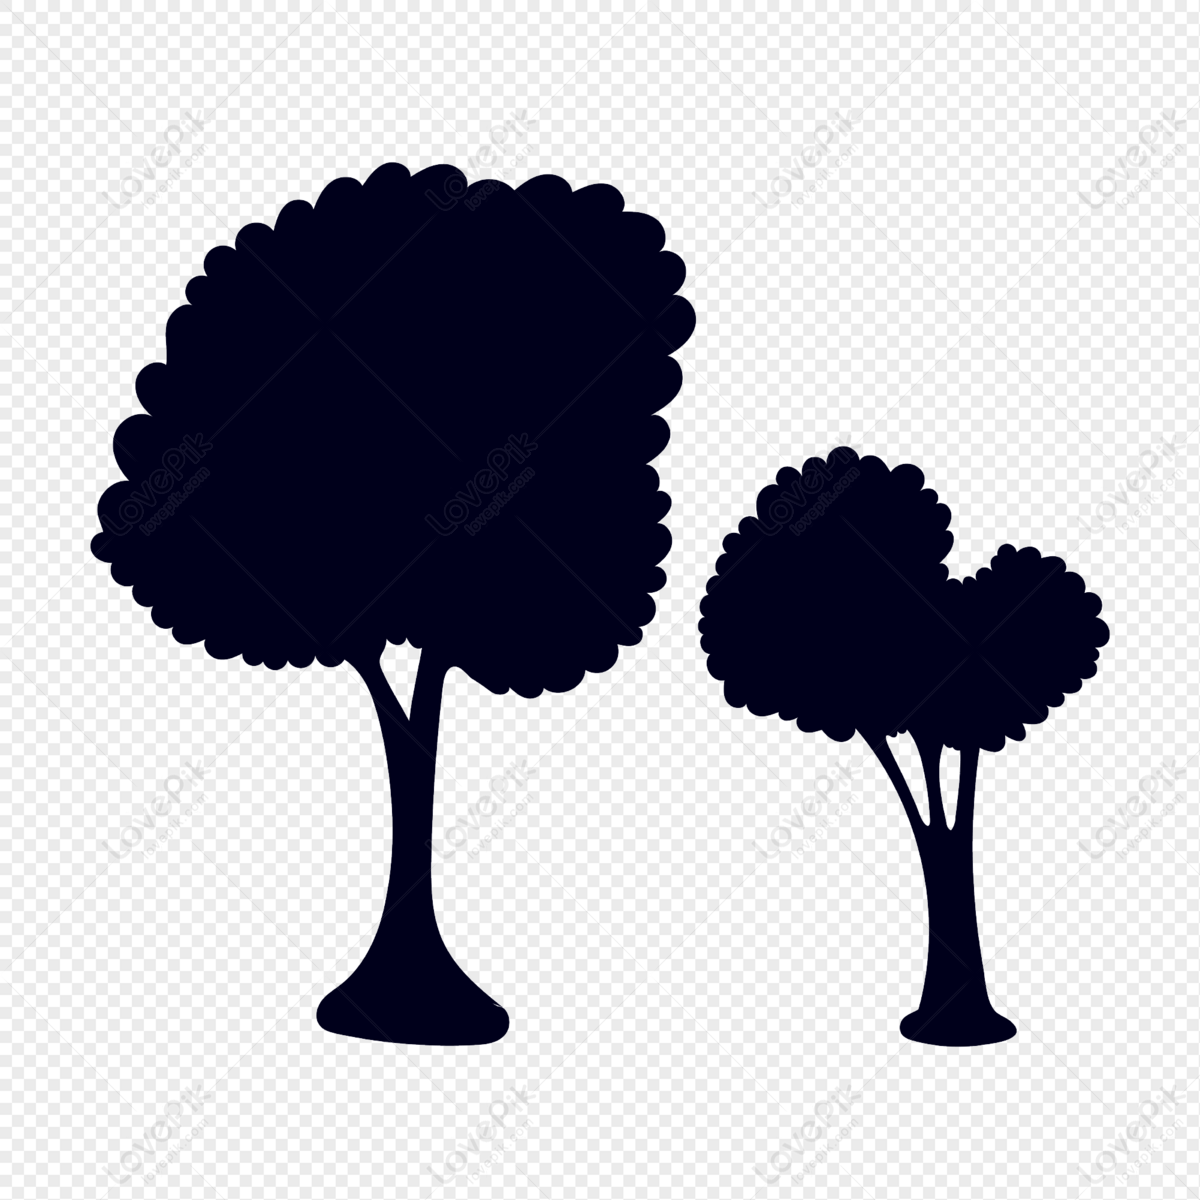 Trees silhouette, small tree, tree, tree silhouette png transparent image